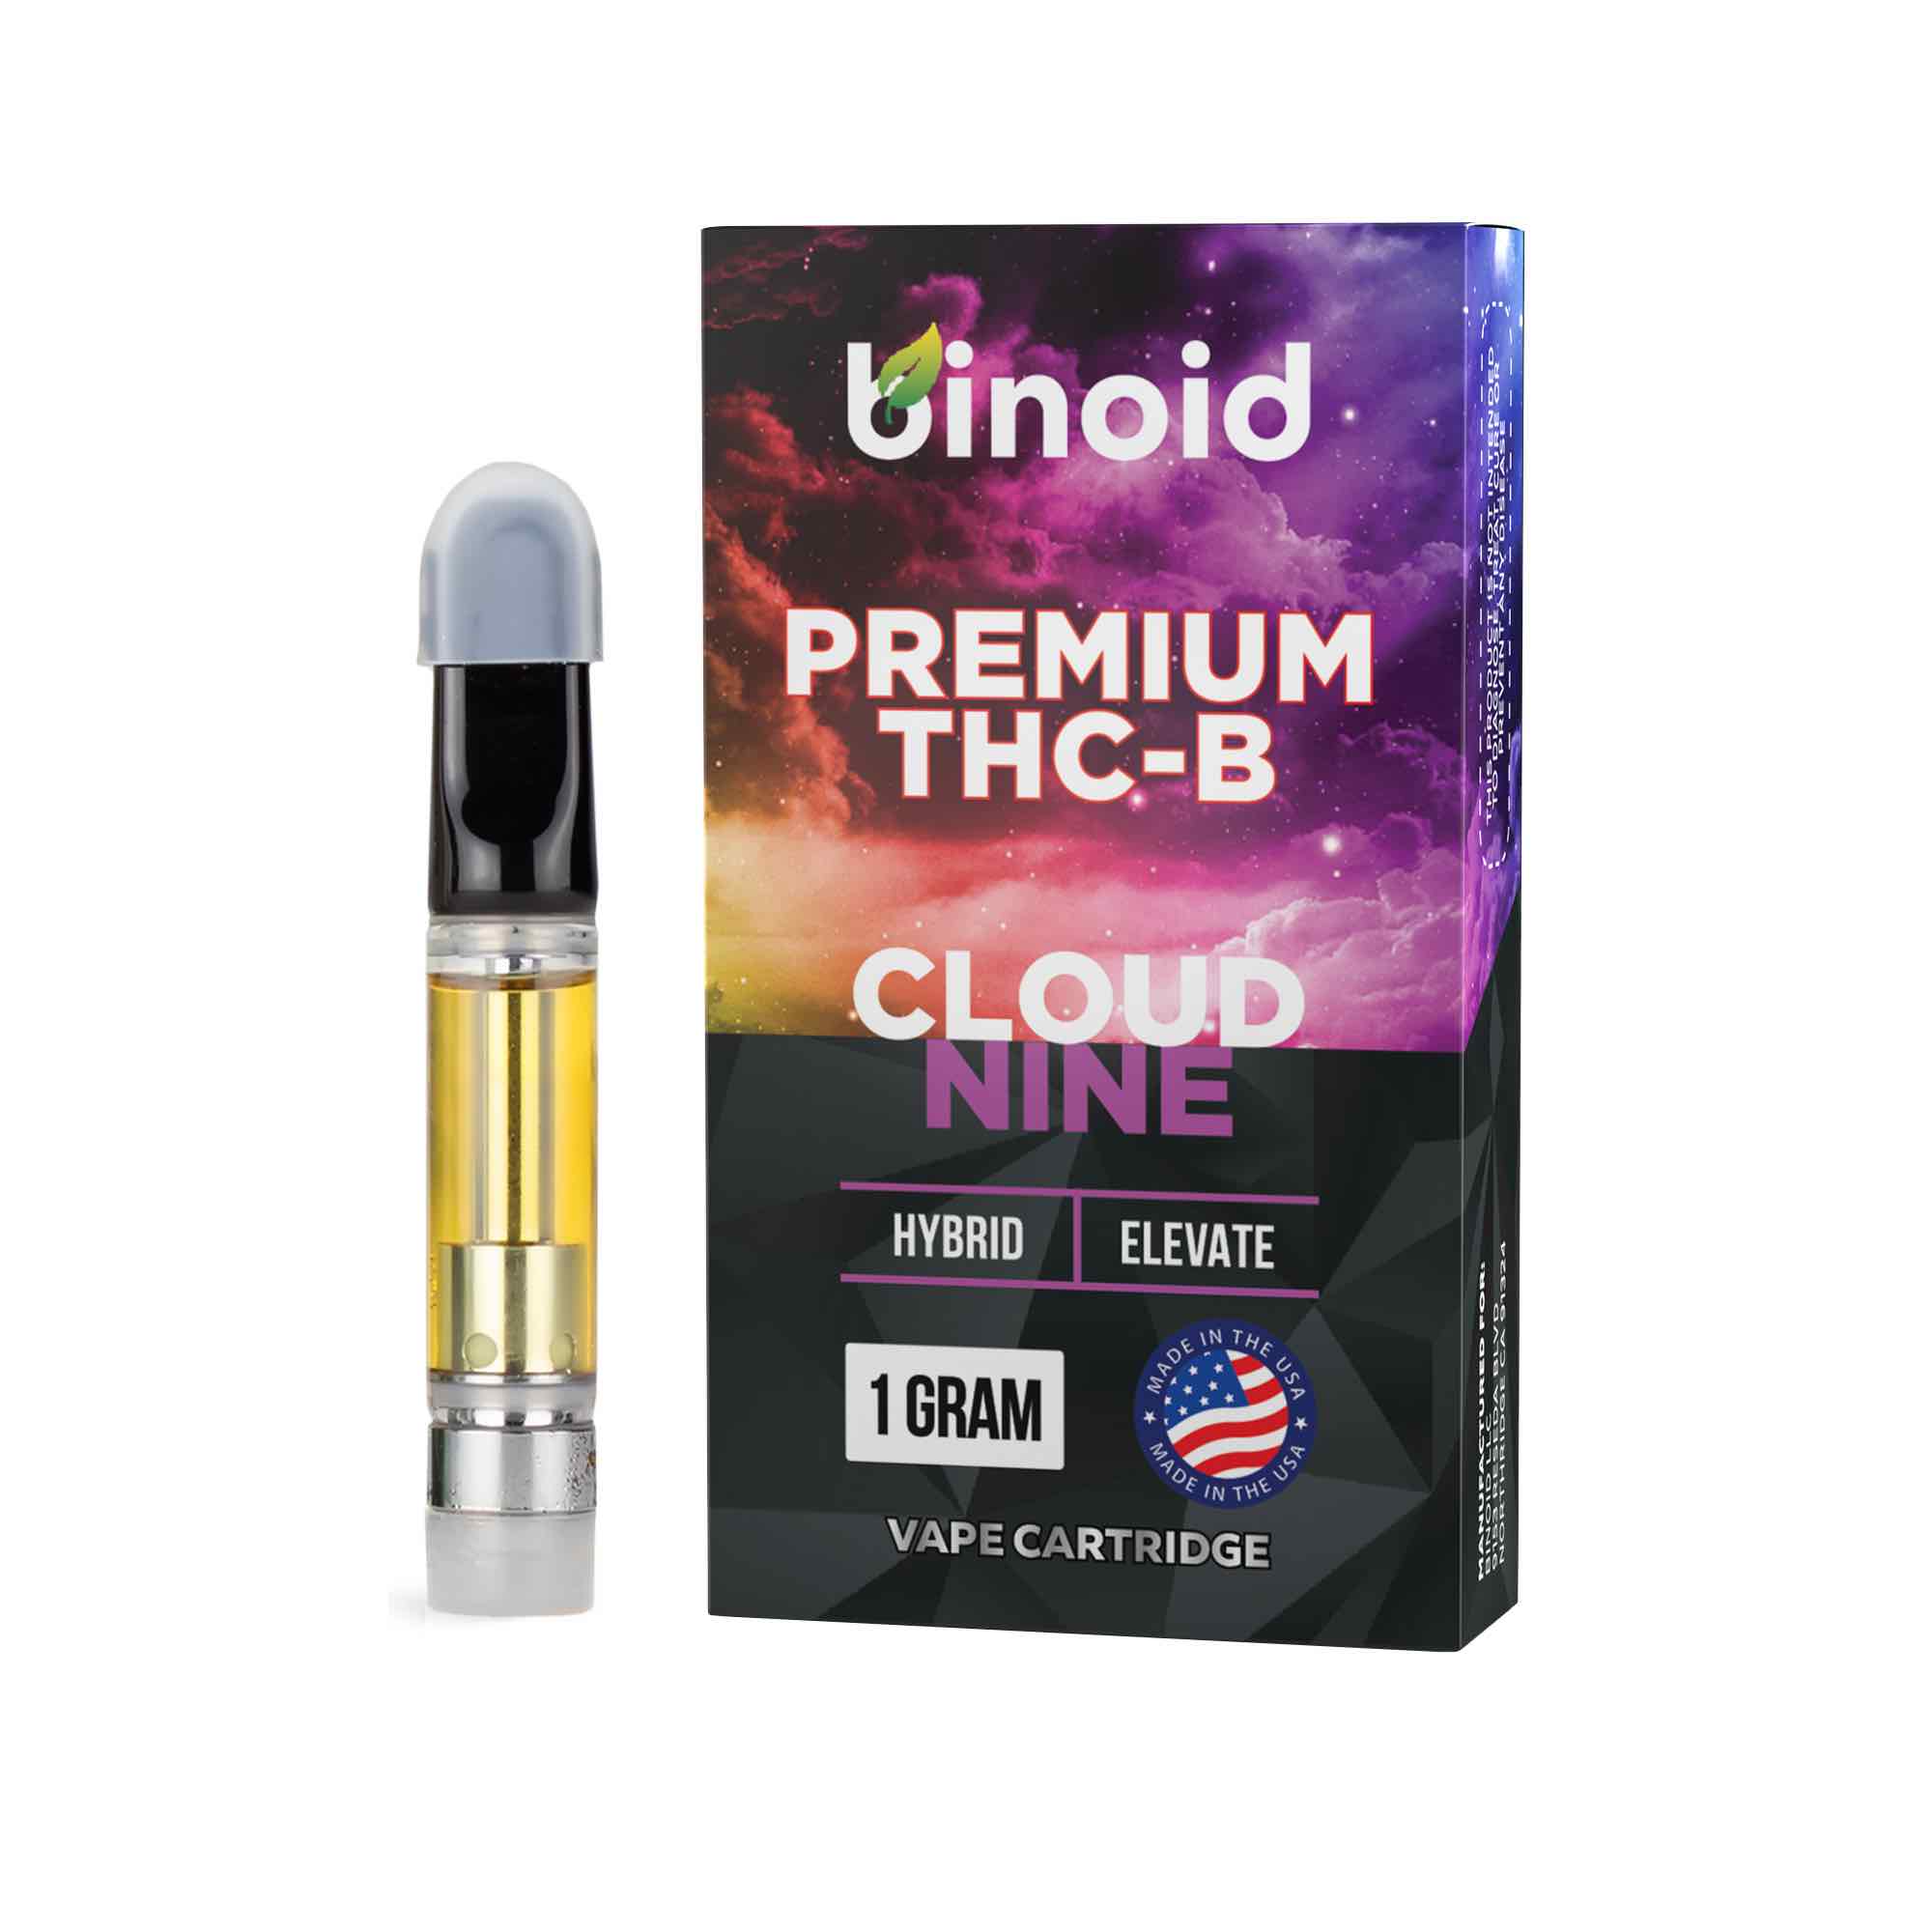 THCB Vapes Cloud Nine Hybrid For Sale Buy Online Benefits Effects Anxiety Sleep Insomnia Pain Near Me Best Place